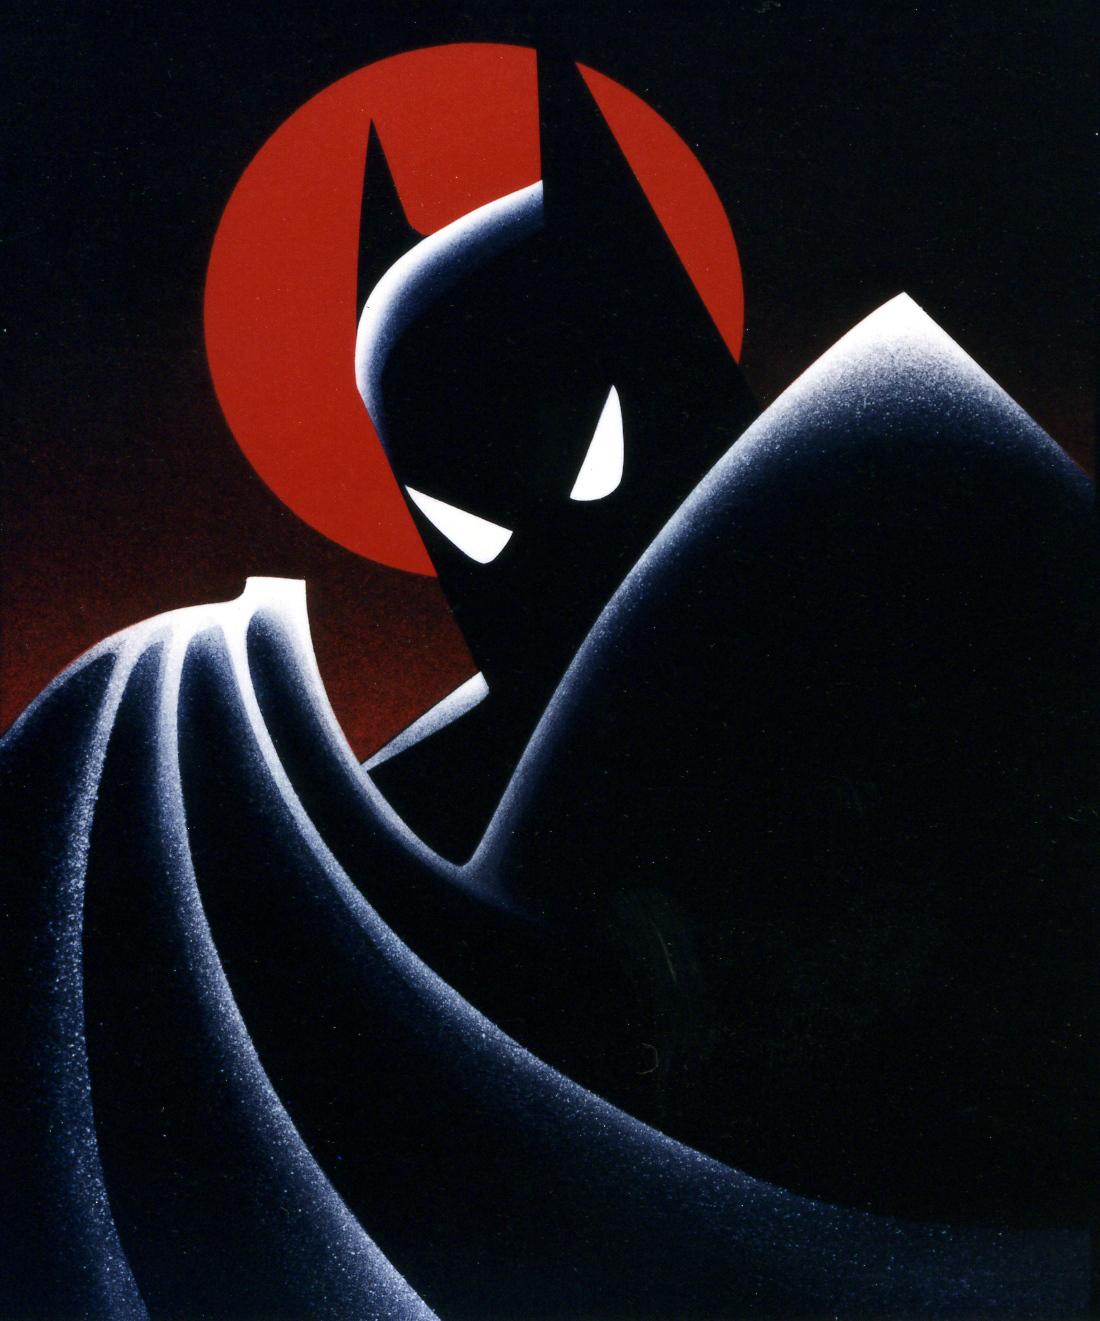 batman the animated series the forgotten soundtrack